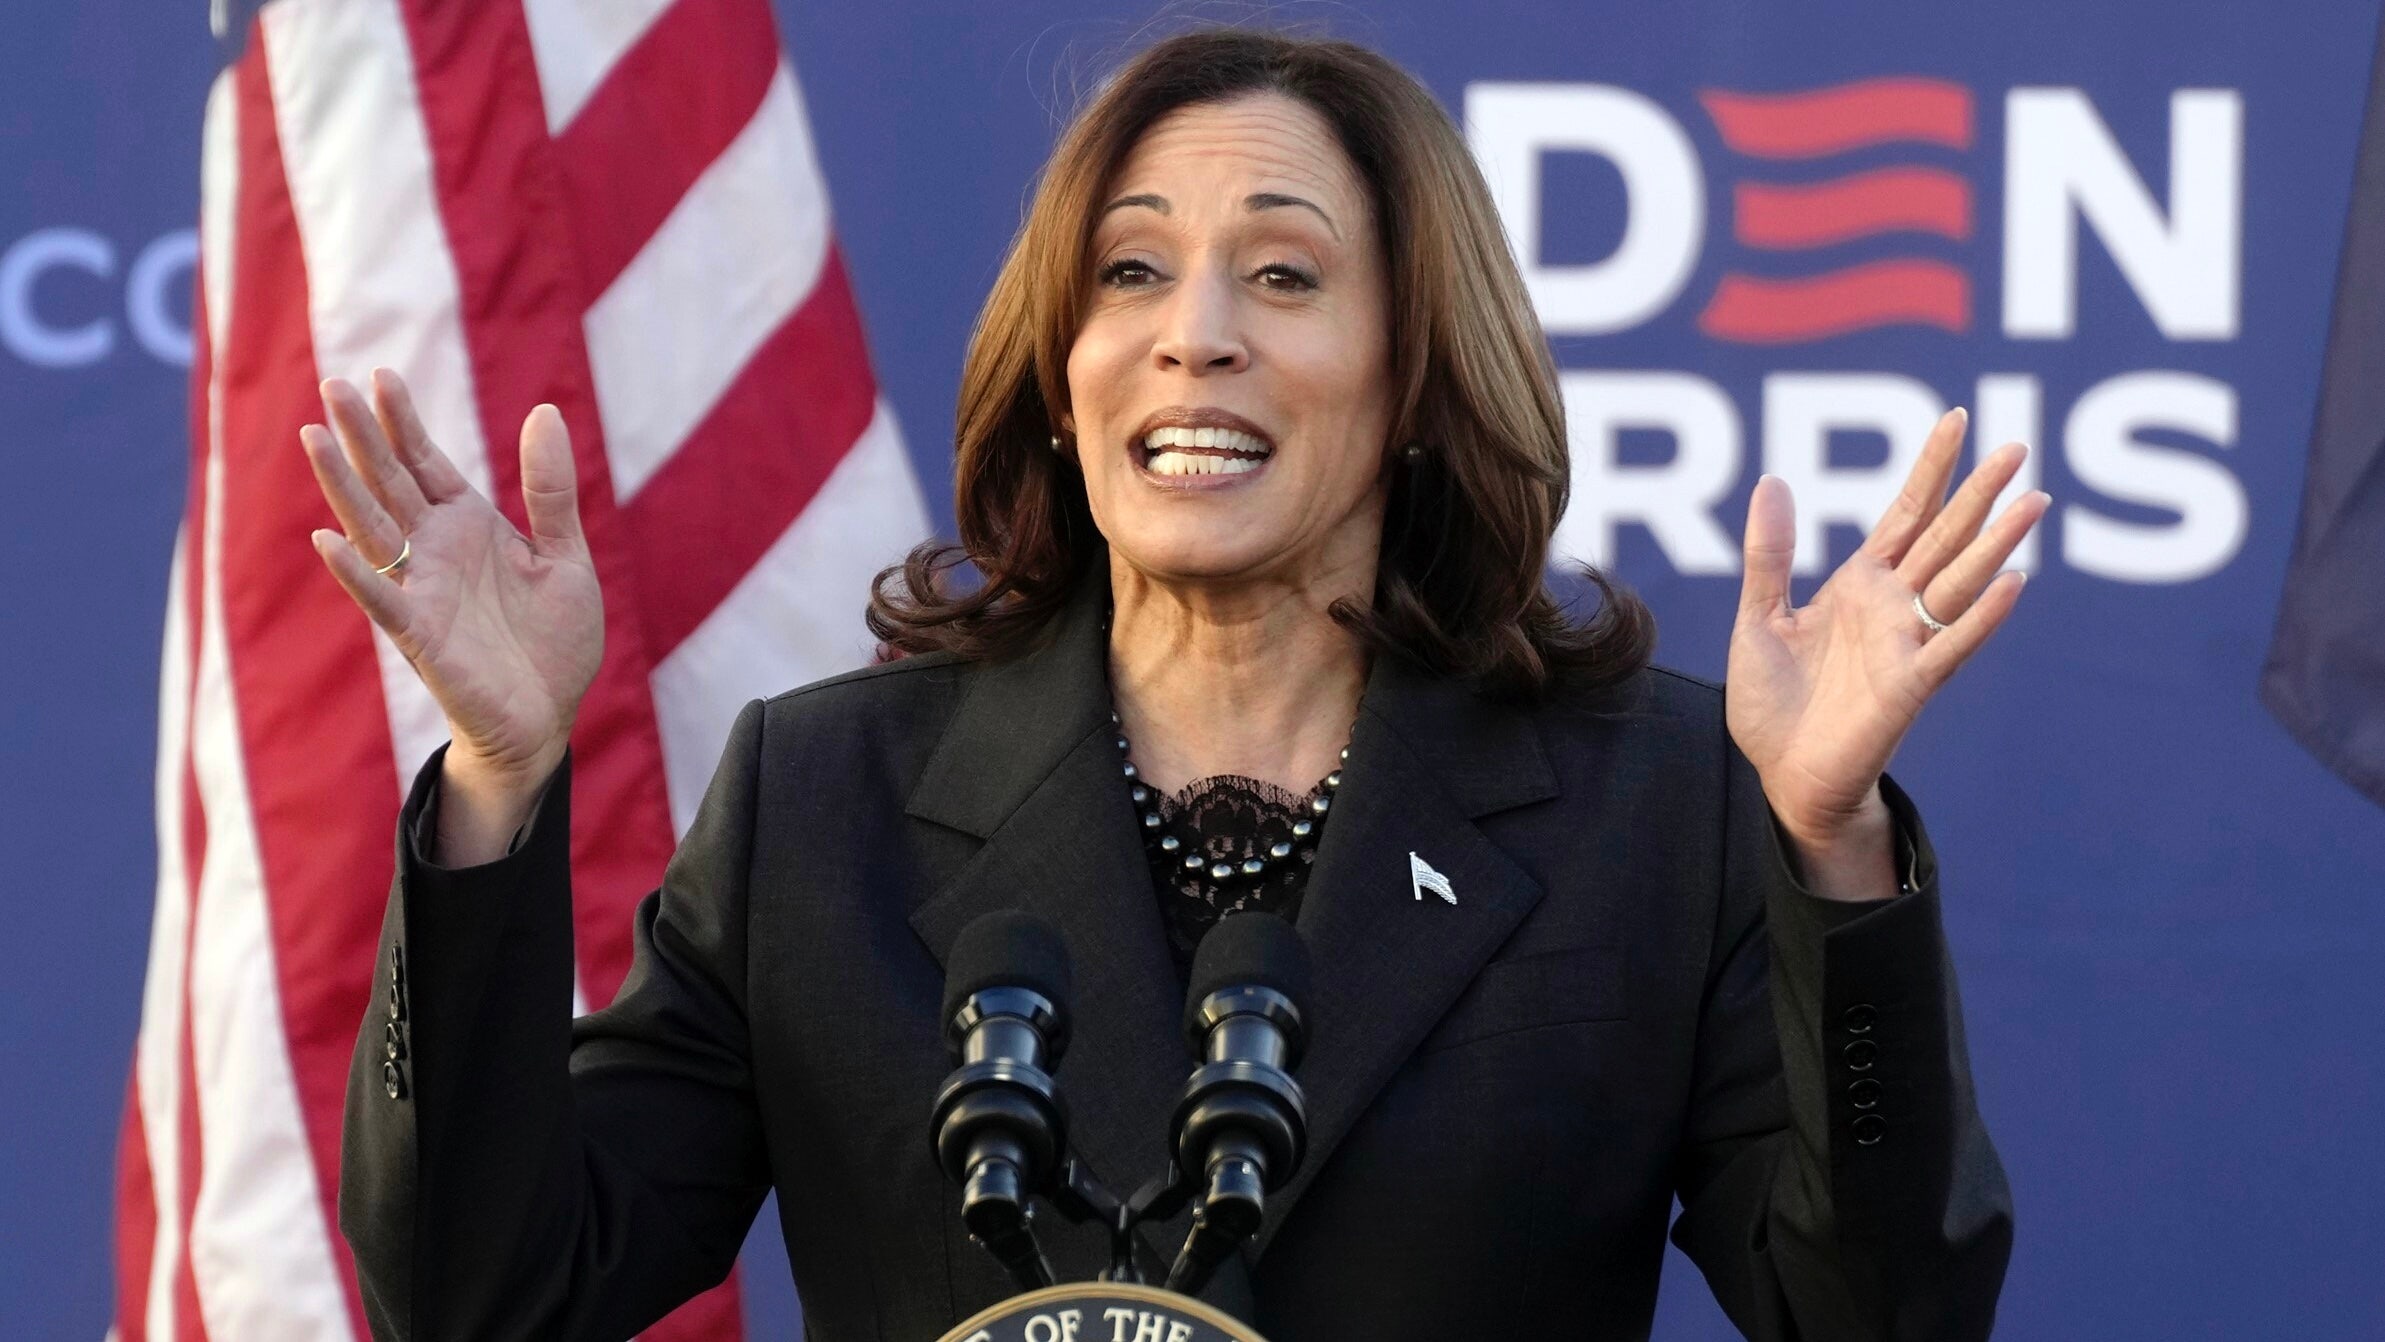 Harris to give prediction of ‘what a second Trump term looks like’ during Arizona campaign stop